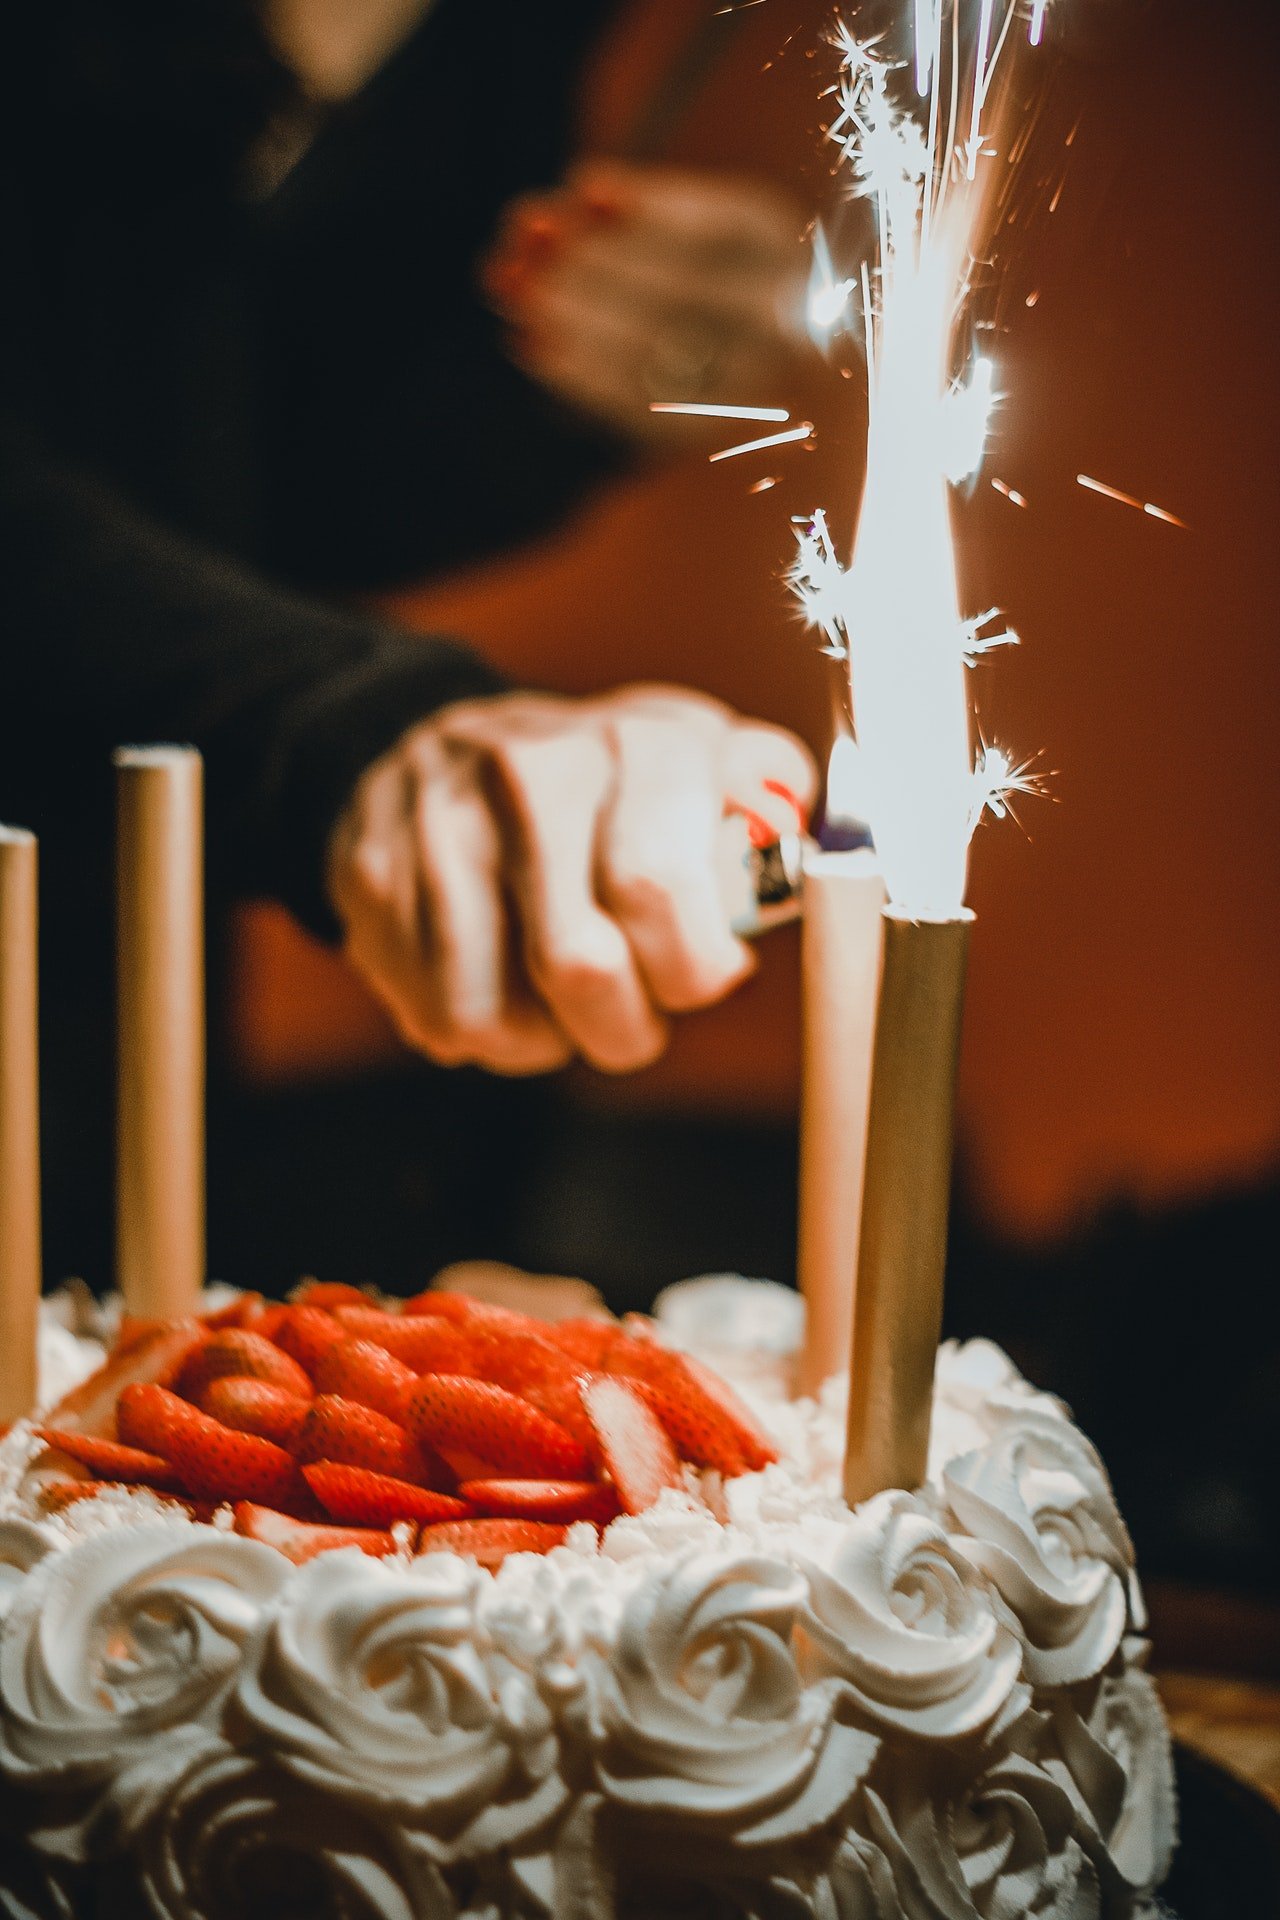 They decided to sing happy birthday and let Fiona rest. | Source: Pexels